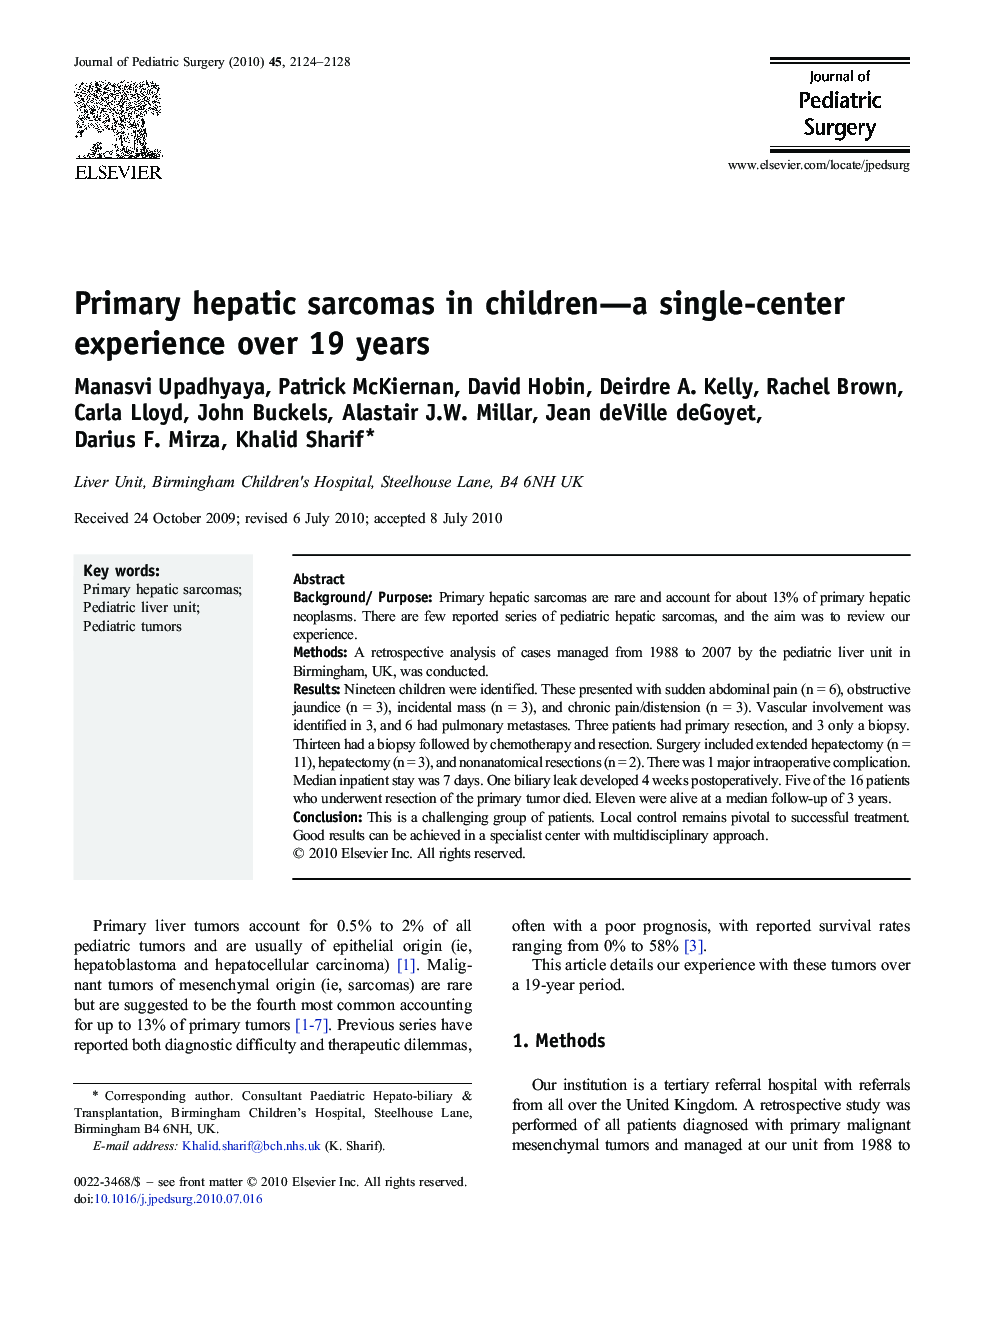 Primary hepatic sarcomas in children—a single-center experience over 19 years